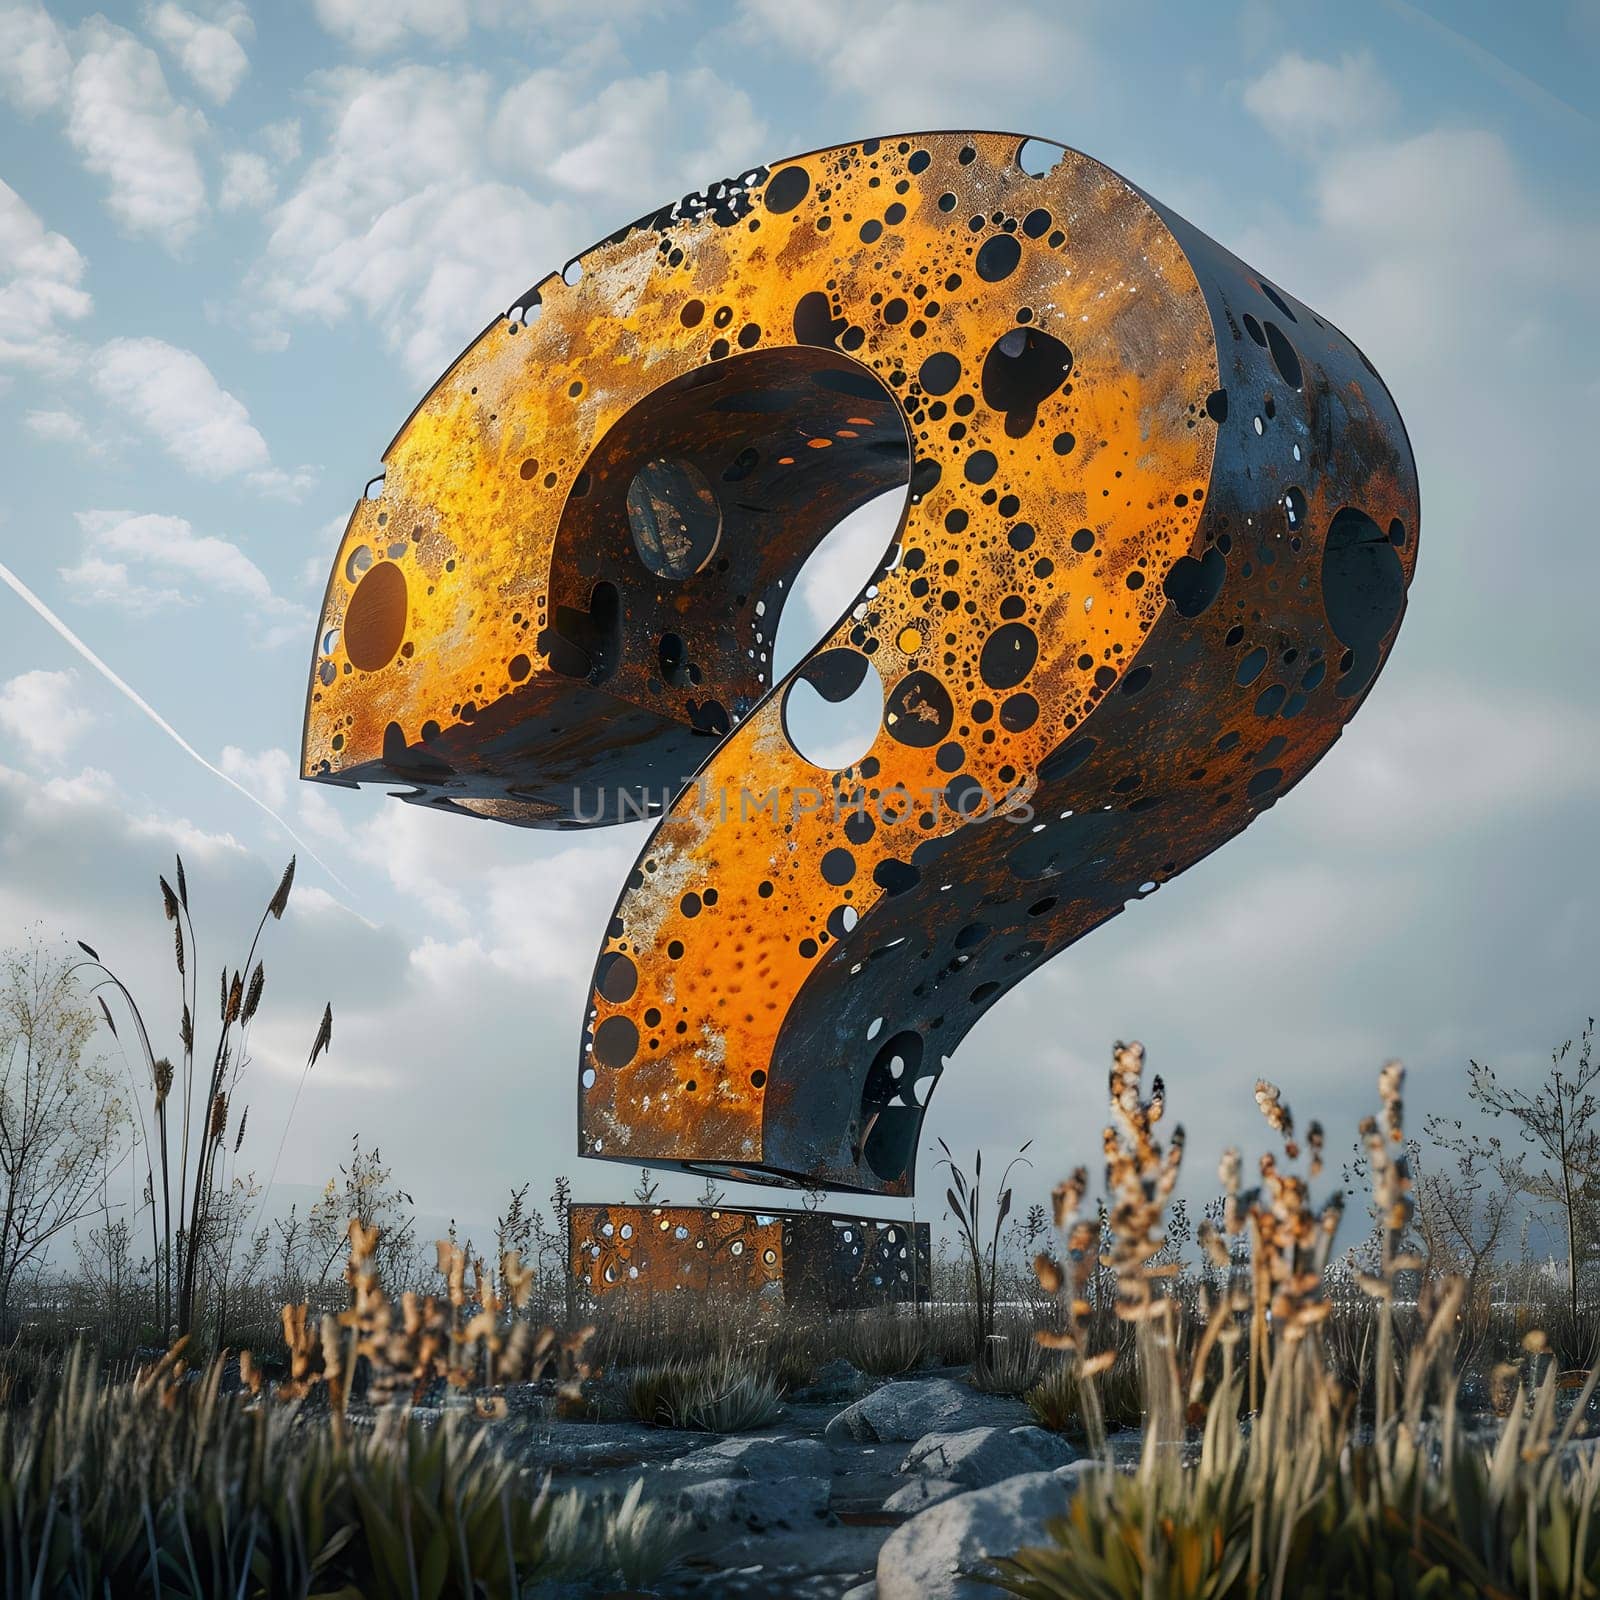 A weathered question mark is resting in the center of a vast grassy field, surrounded by the beauty of nature and a peaceful sky above